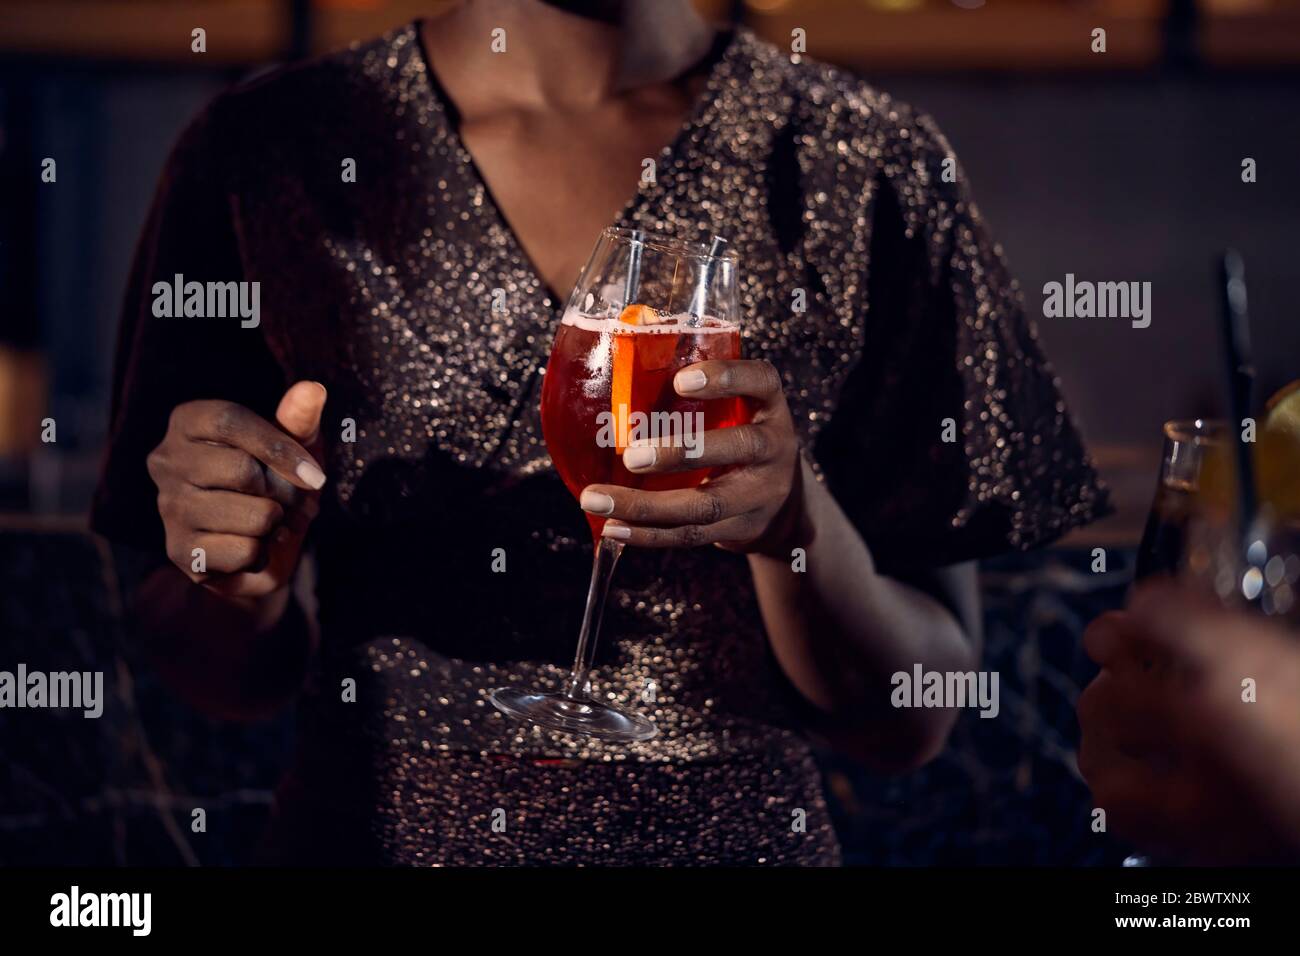 Close-up of woman holding a cocktail glass in a bar Stock Photo